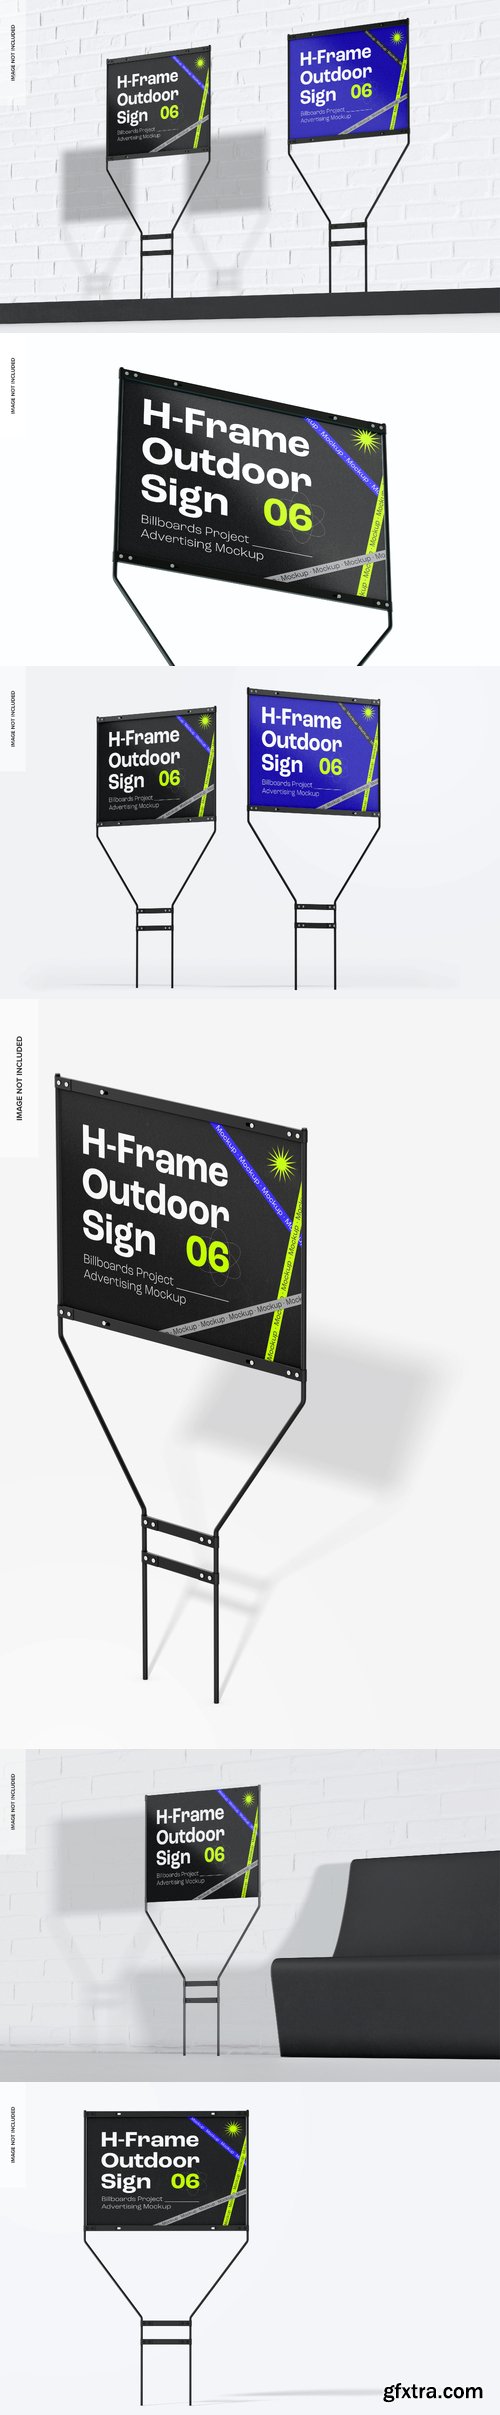 Hframe outdoor sign mockup